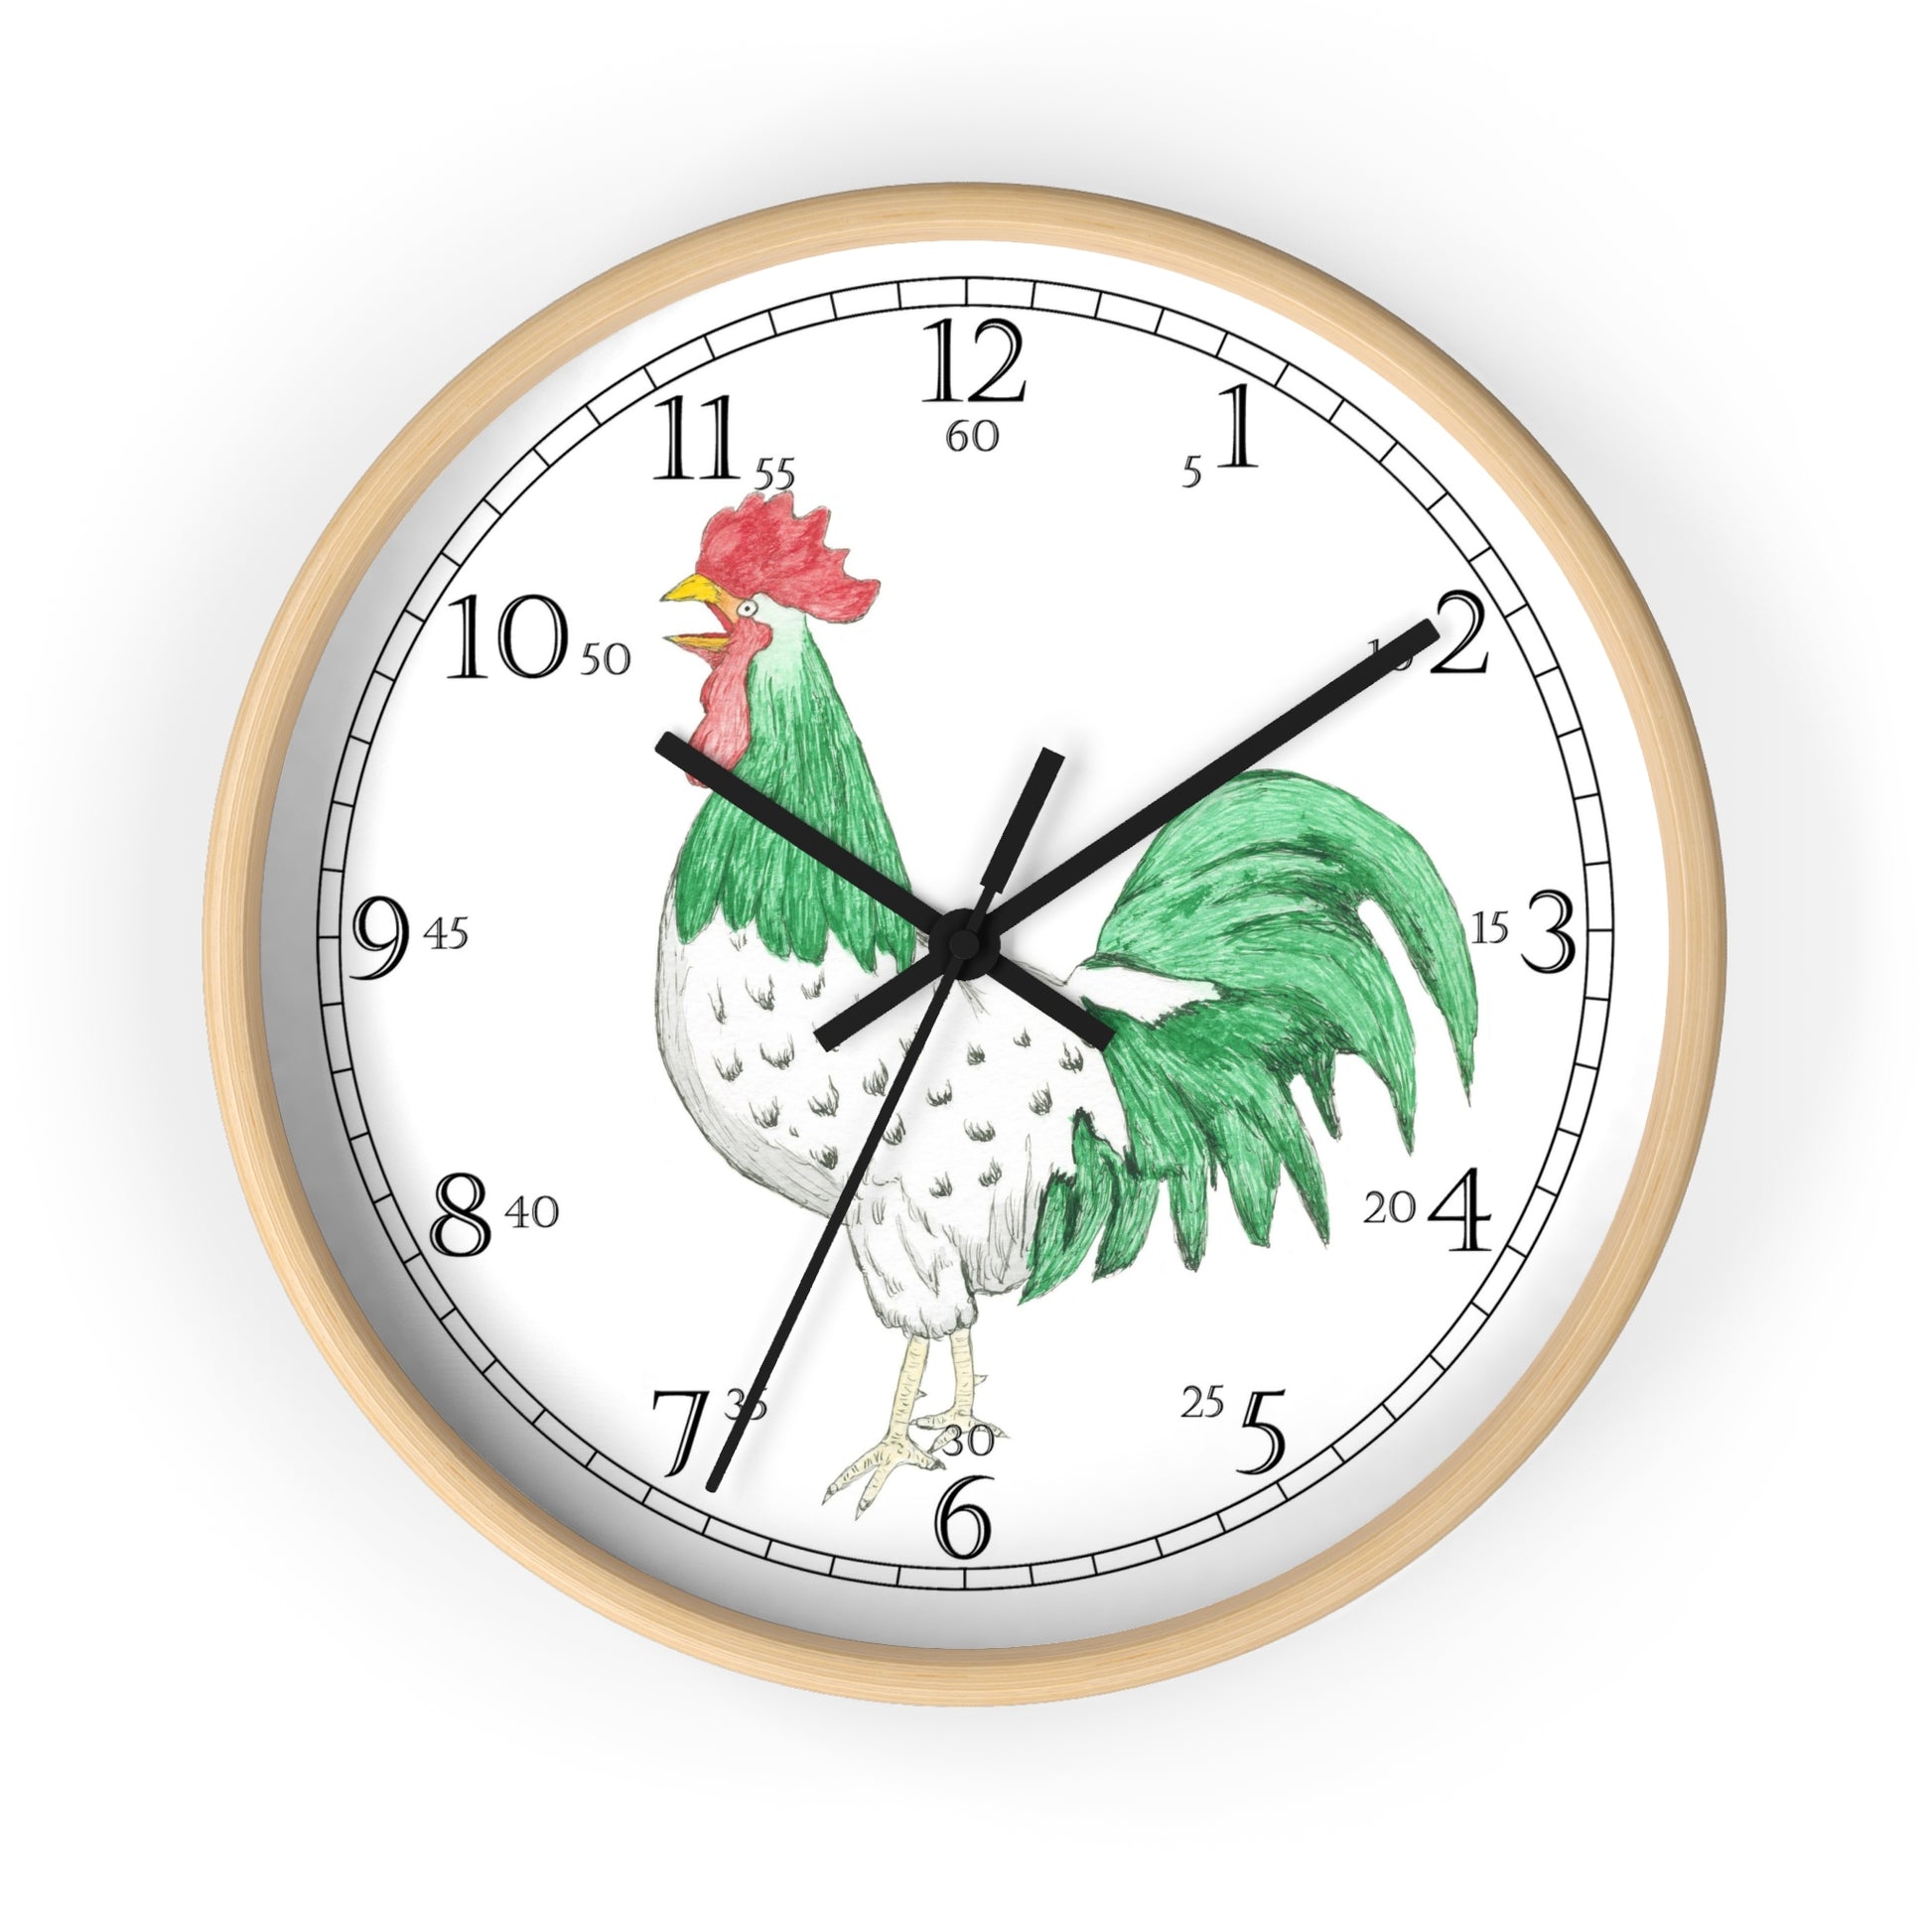 Henry Rooster us a delightful gentleman who will spark conversation everywhere he goes. His brilliant green tail and neck feathers invite comments, and his dashing red comb and wattle will catch your eye. 